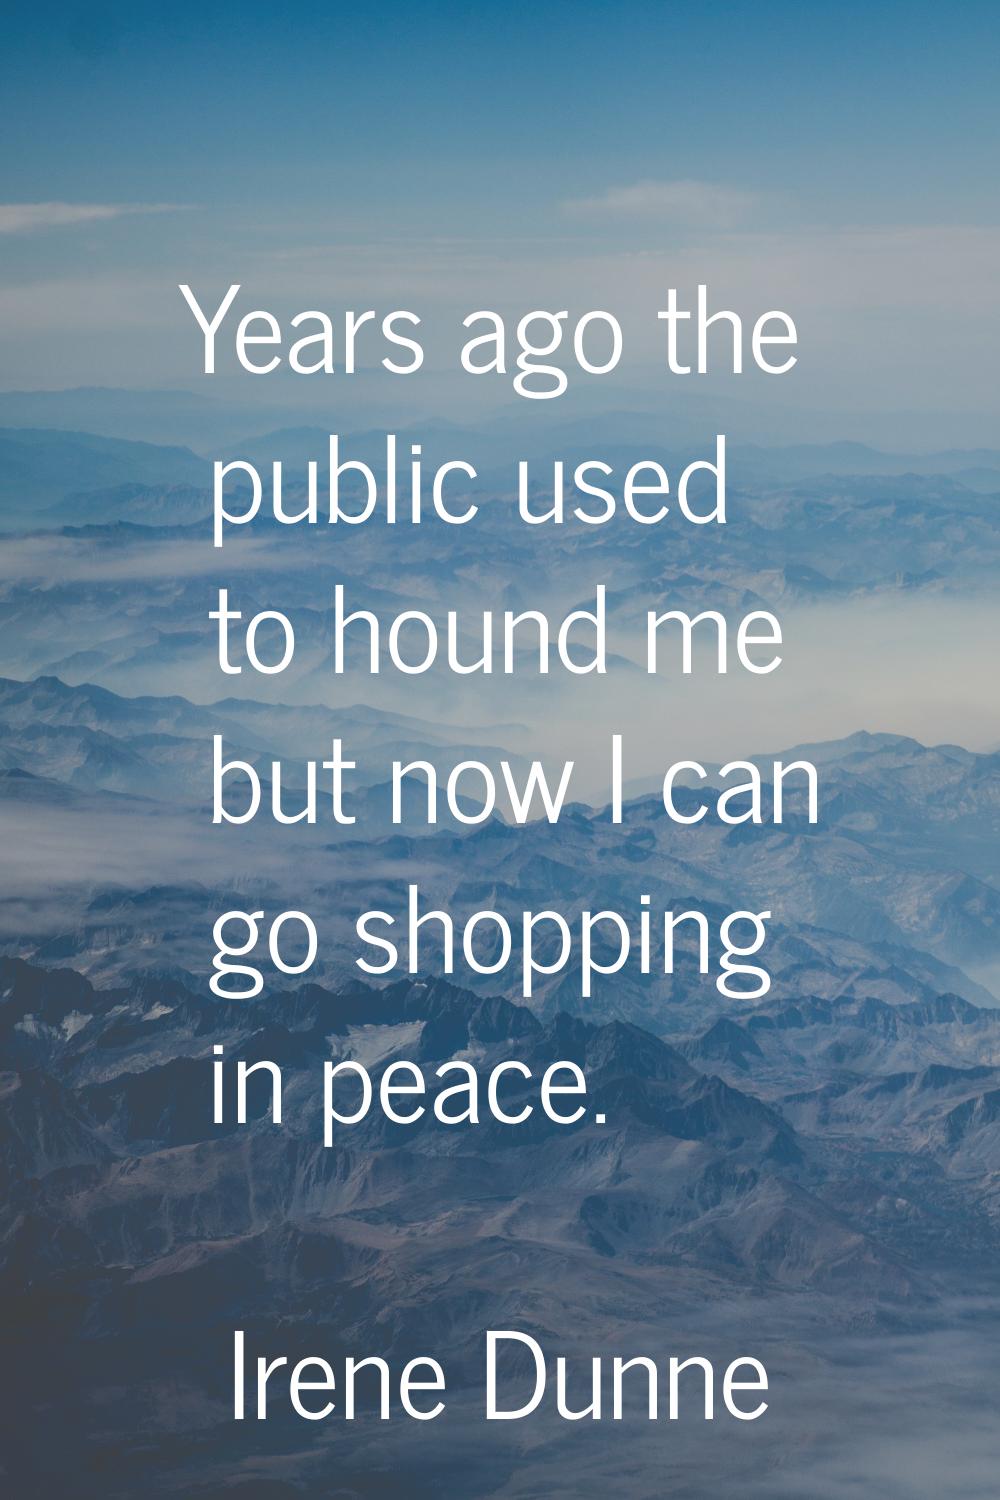 Years ago the public used to hound me but now I can go shopping in peace.